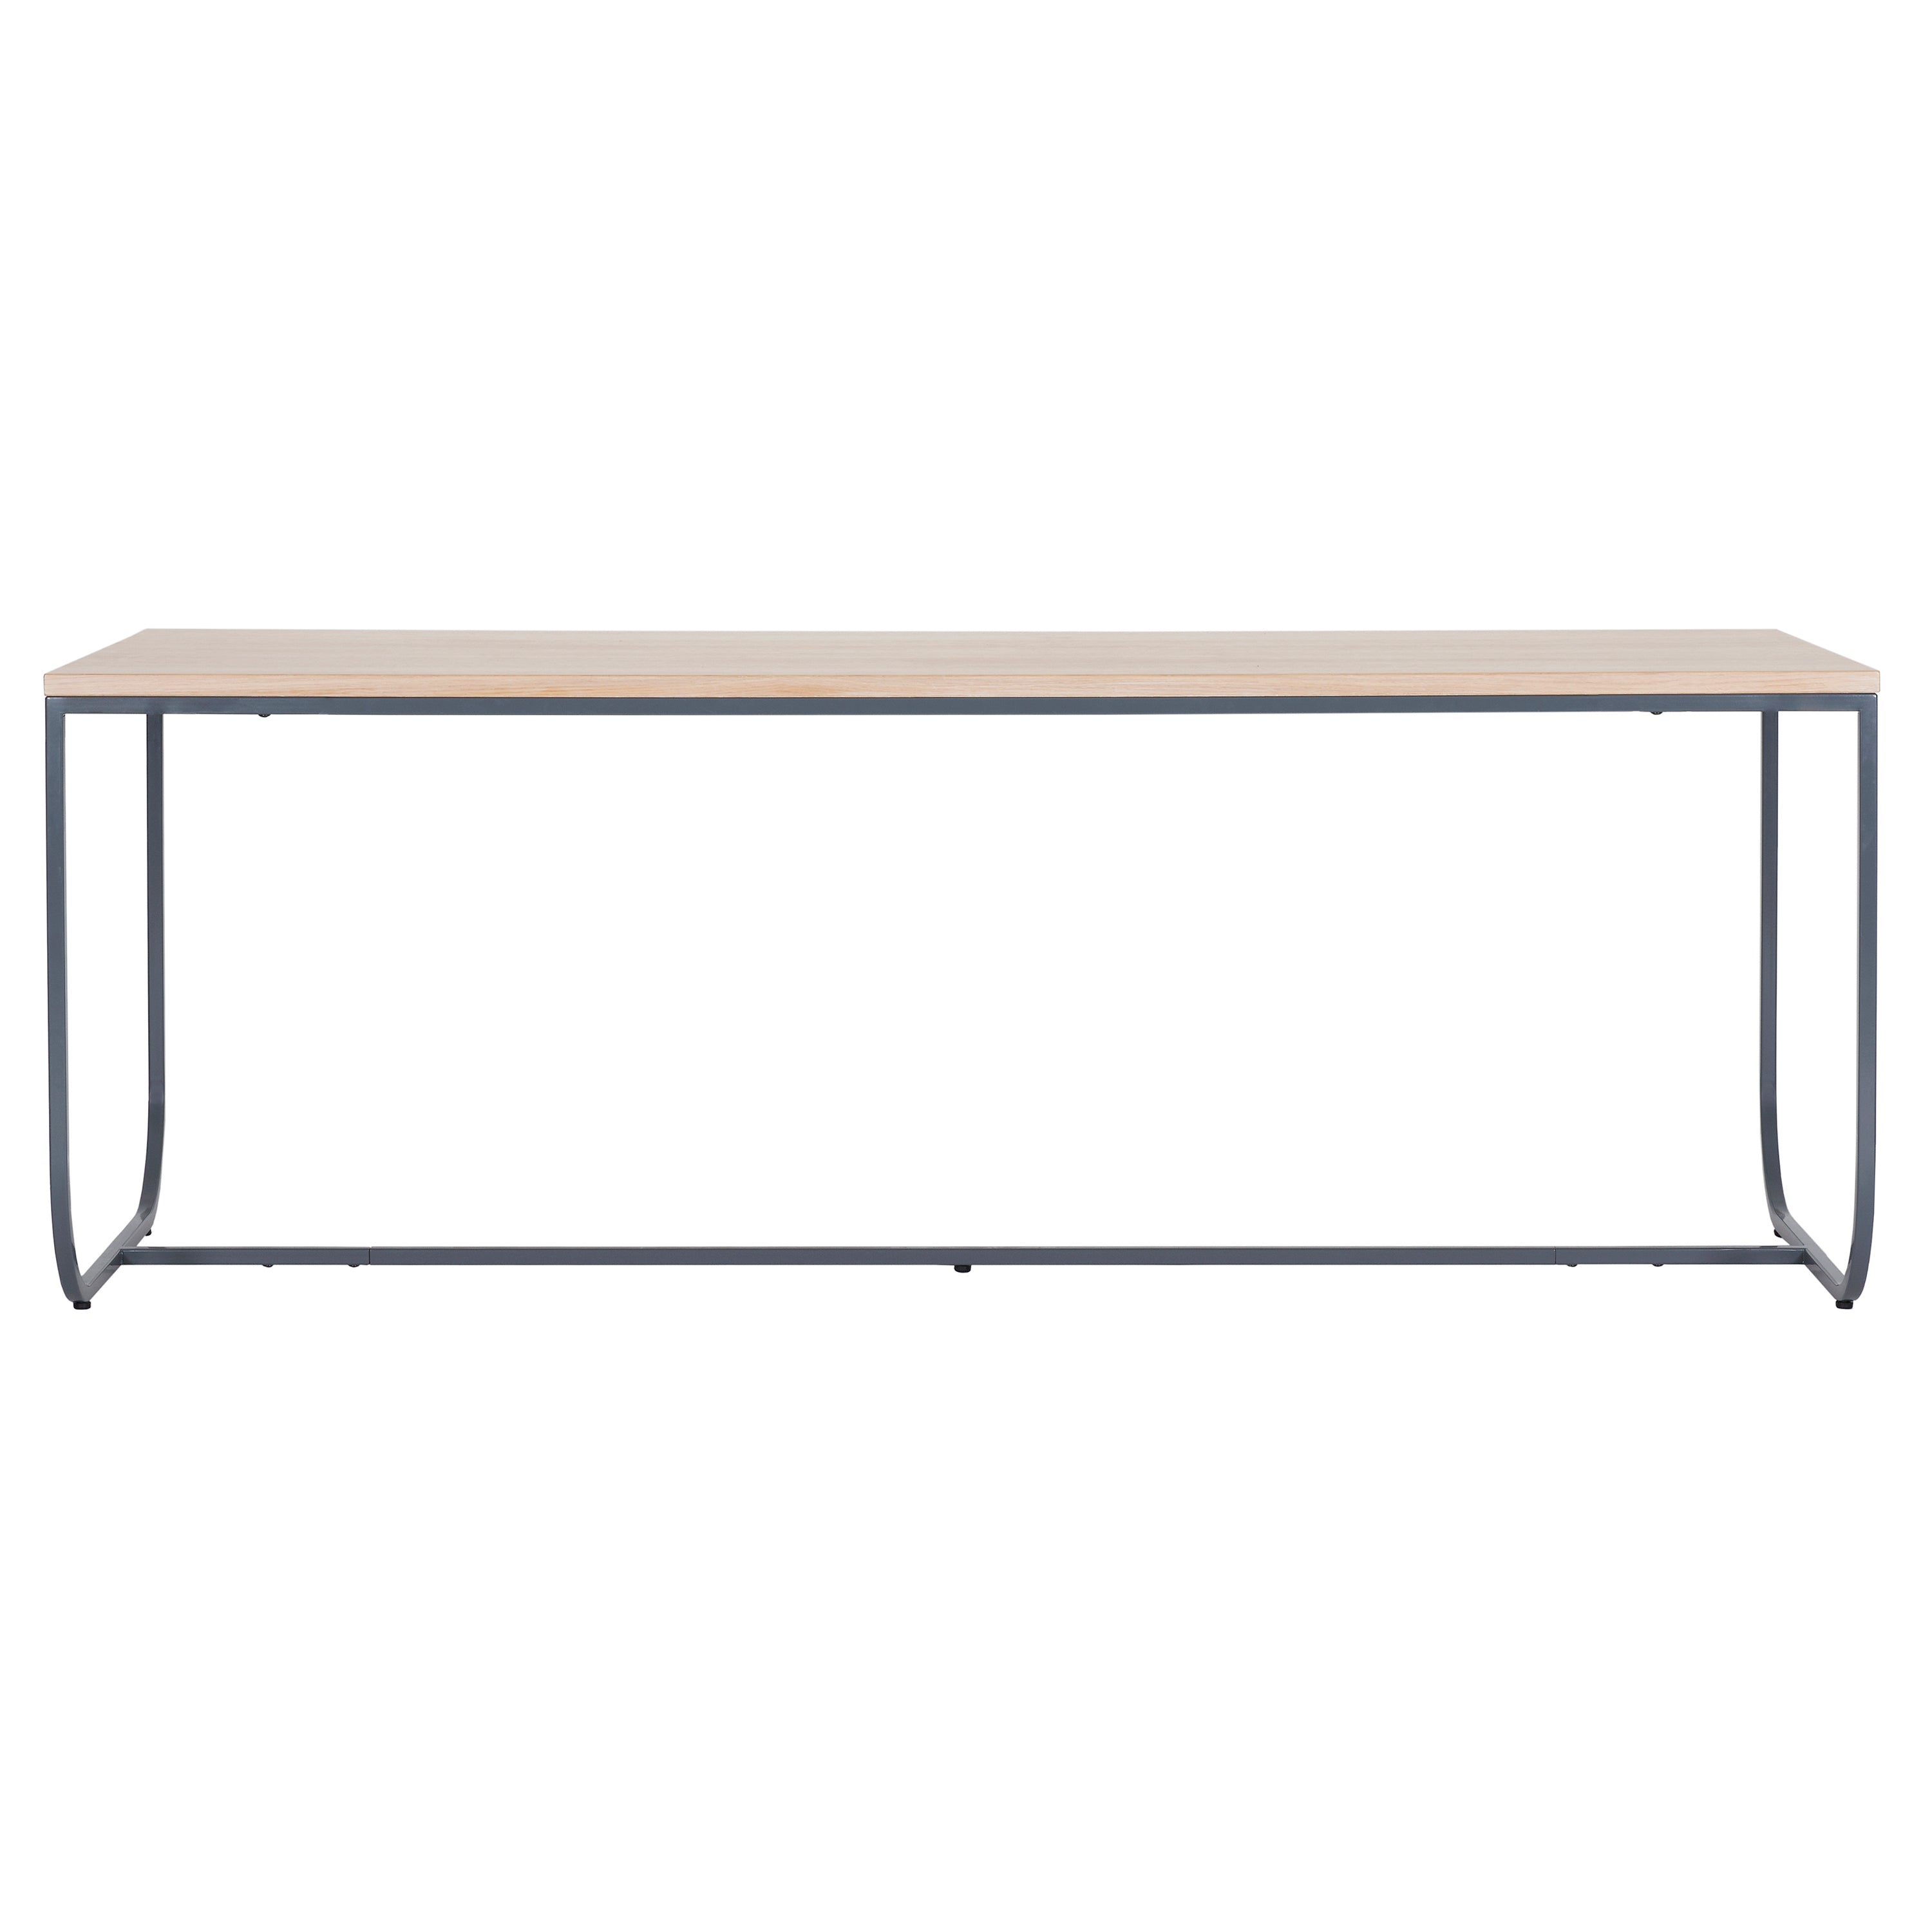 Tati Dining Table Large: White Stained Oak + Storm Grey